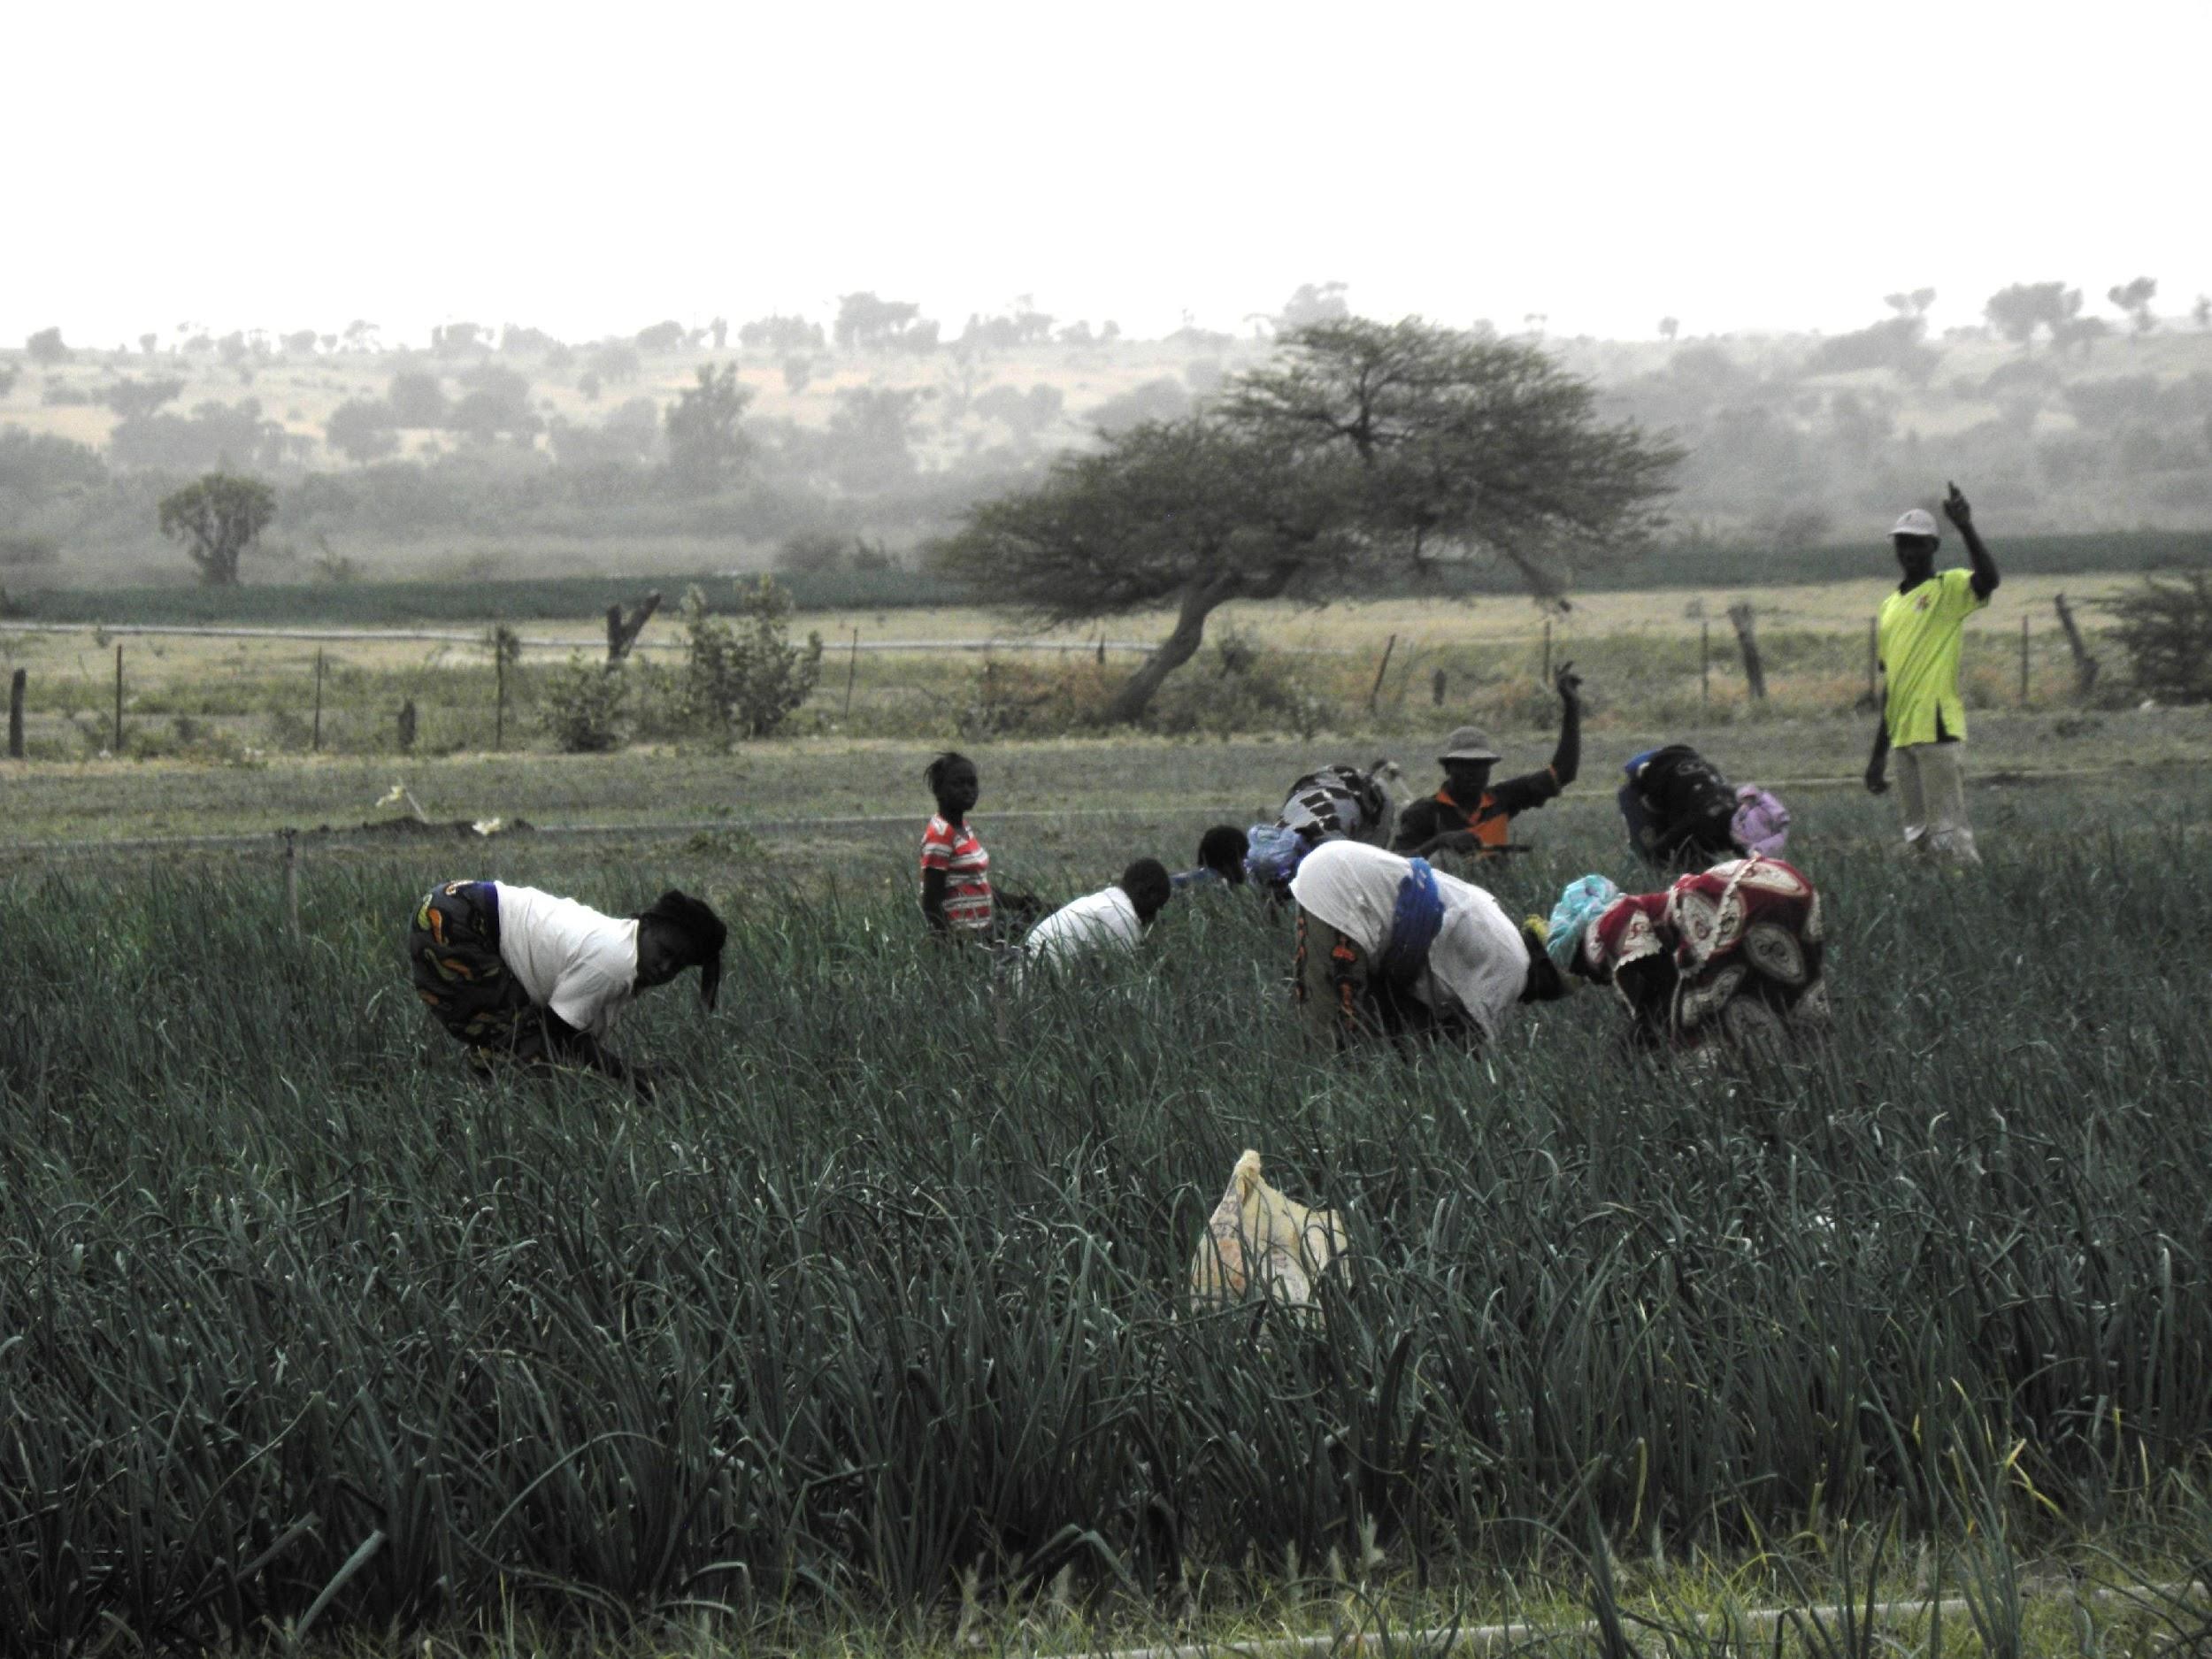 Onion harvest in Niger, photo by Remi Nono-Womdim, FAO (CC BY-NC 2.0)